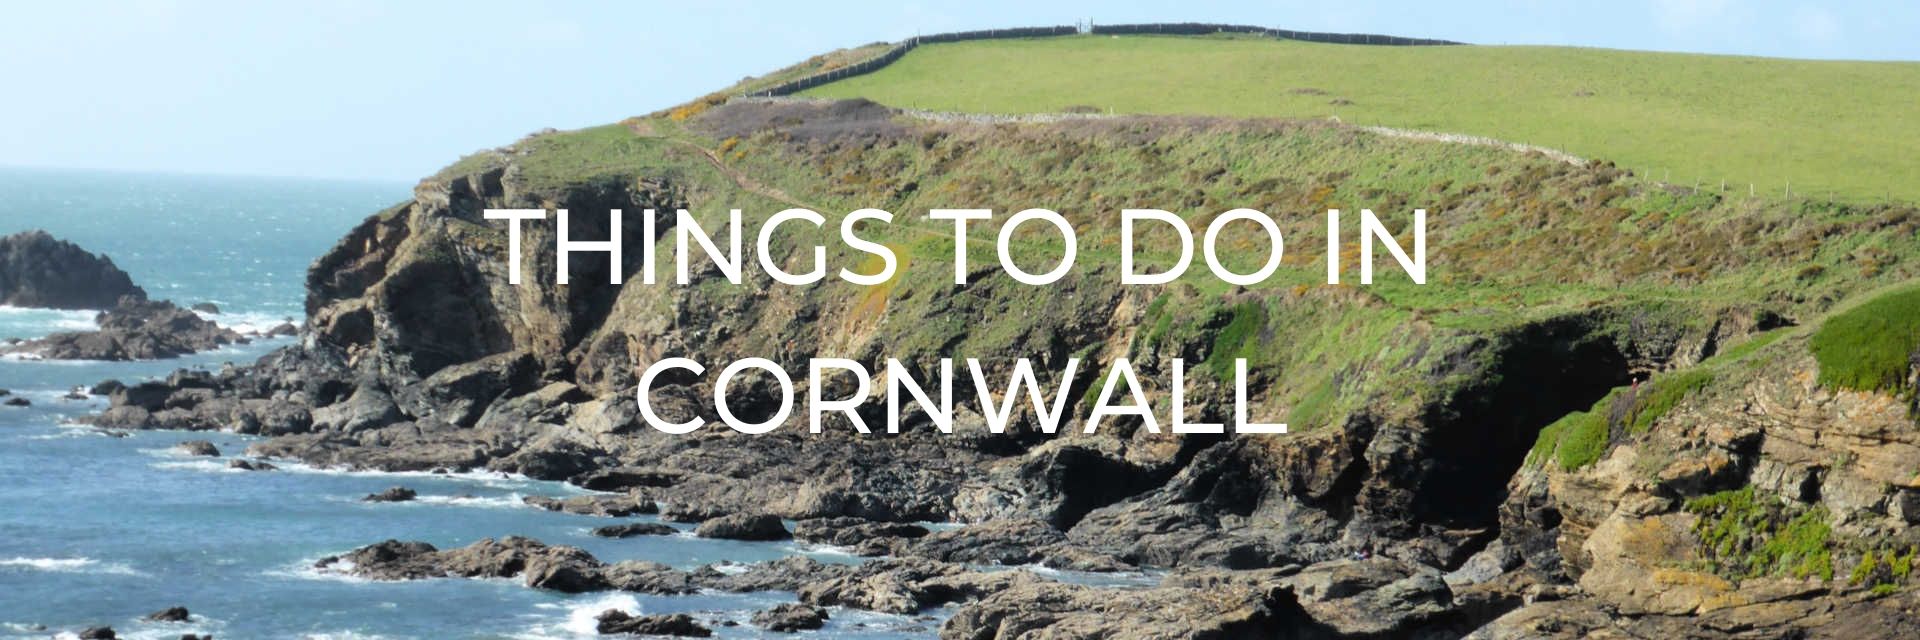 Things to Do in Cornwall Desktop Image